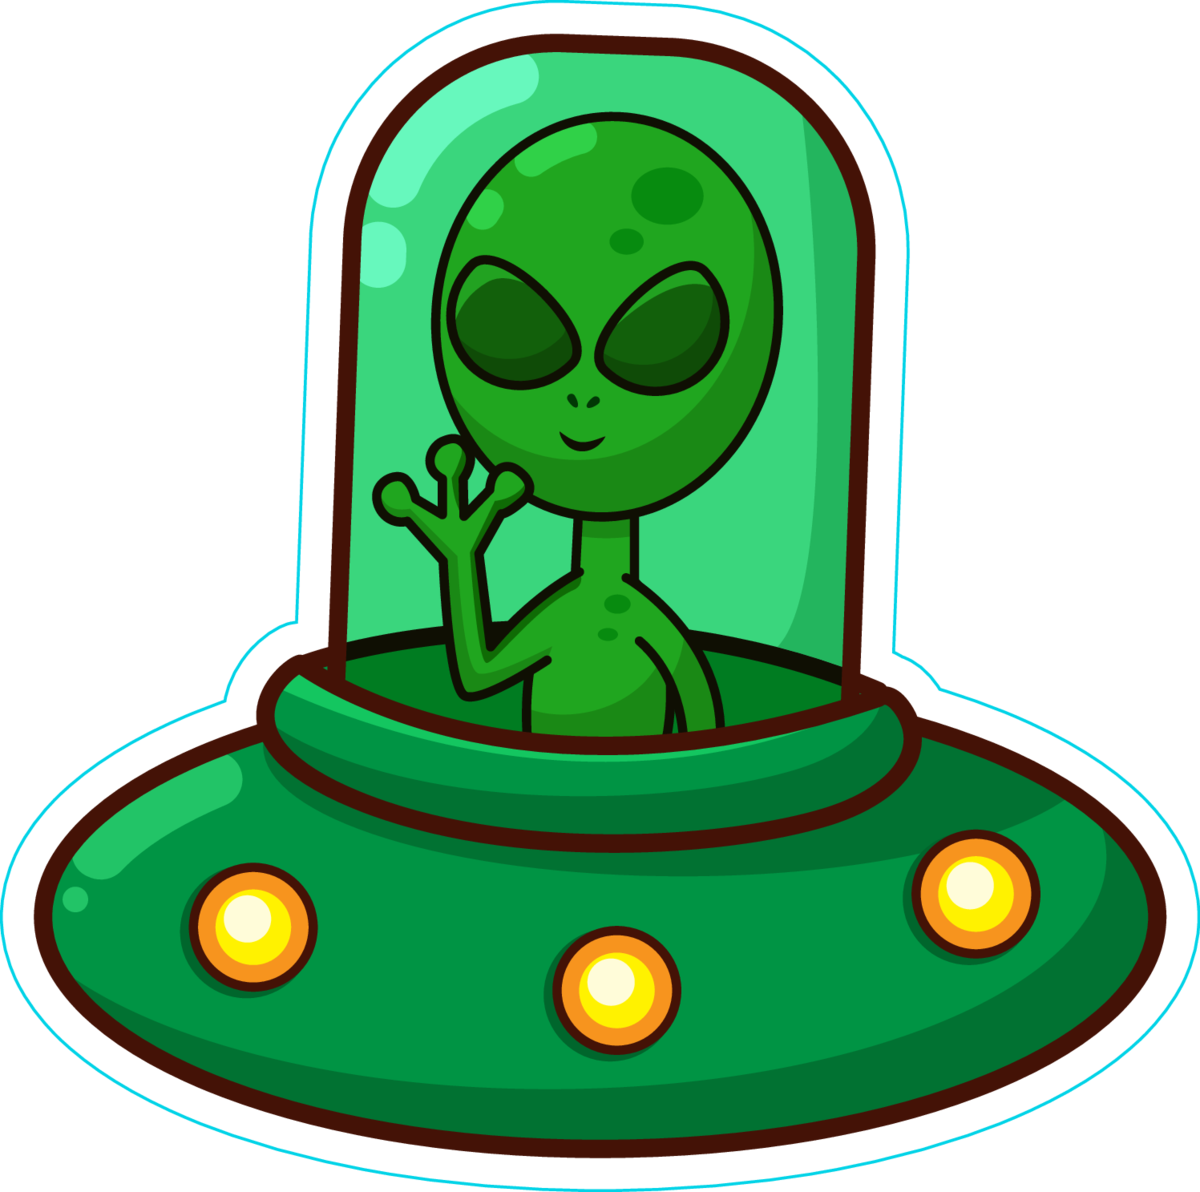 Alien In Spaceship Cartoon Sticker Alien In Spaceship Clipart Large Size Png Image Pikpng